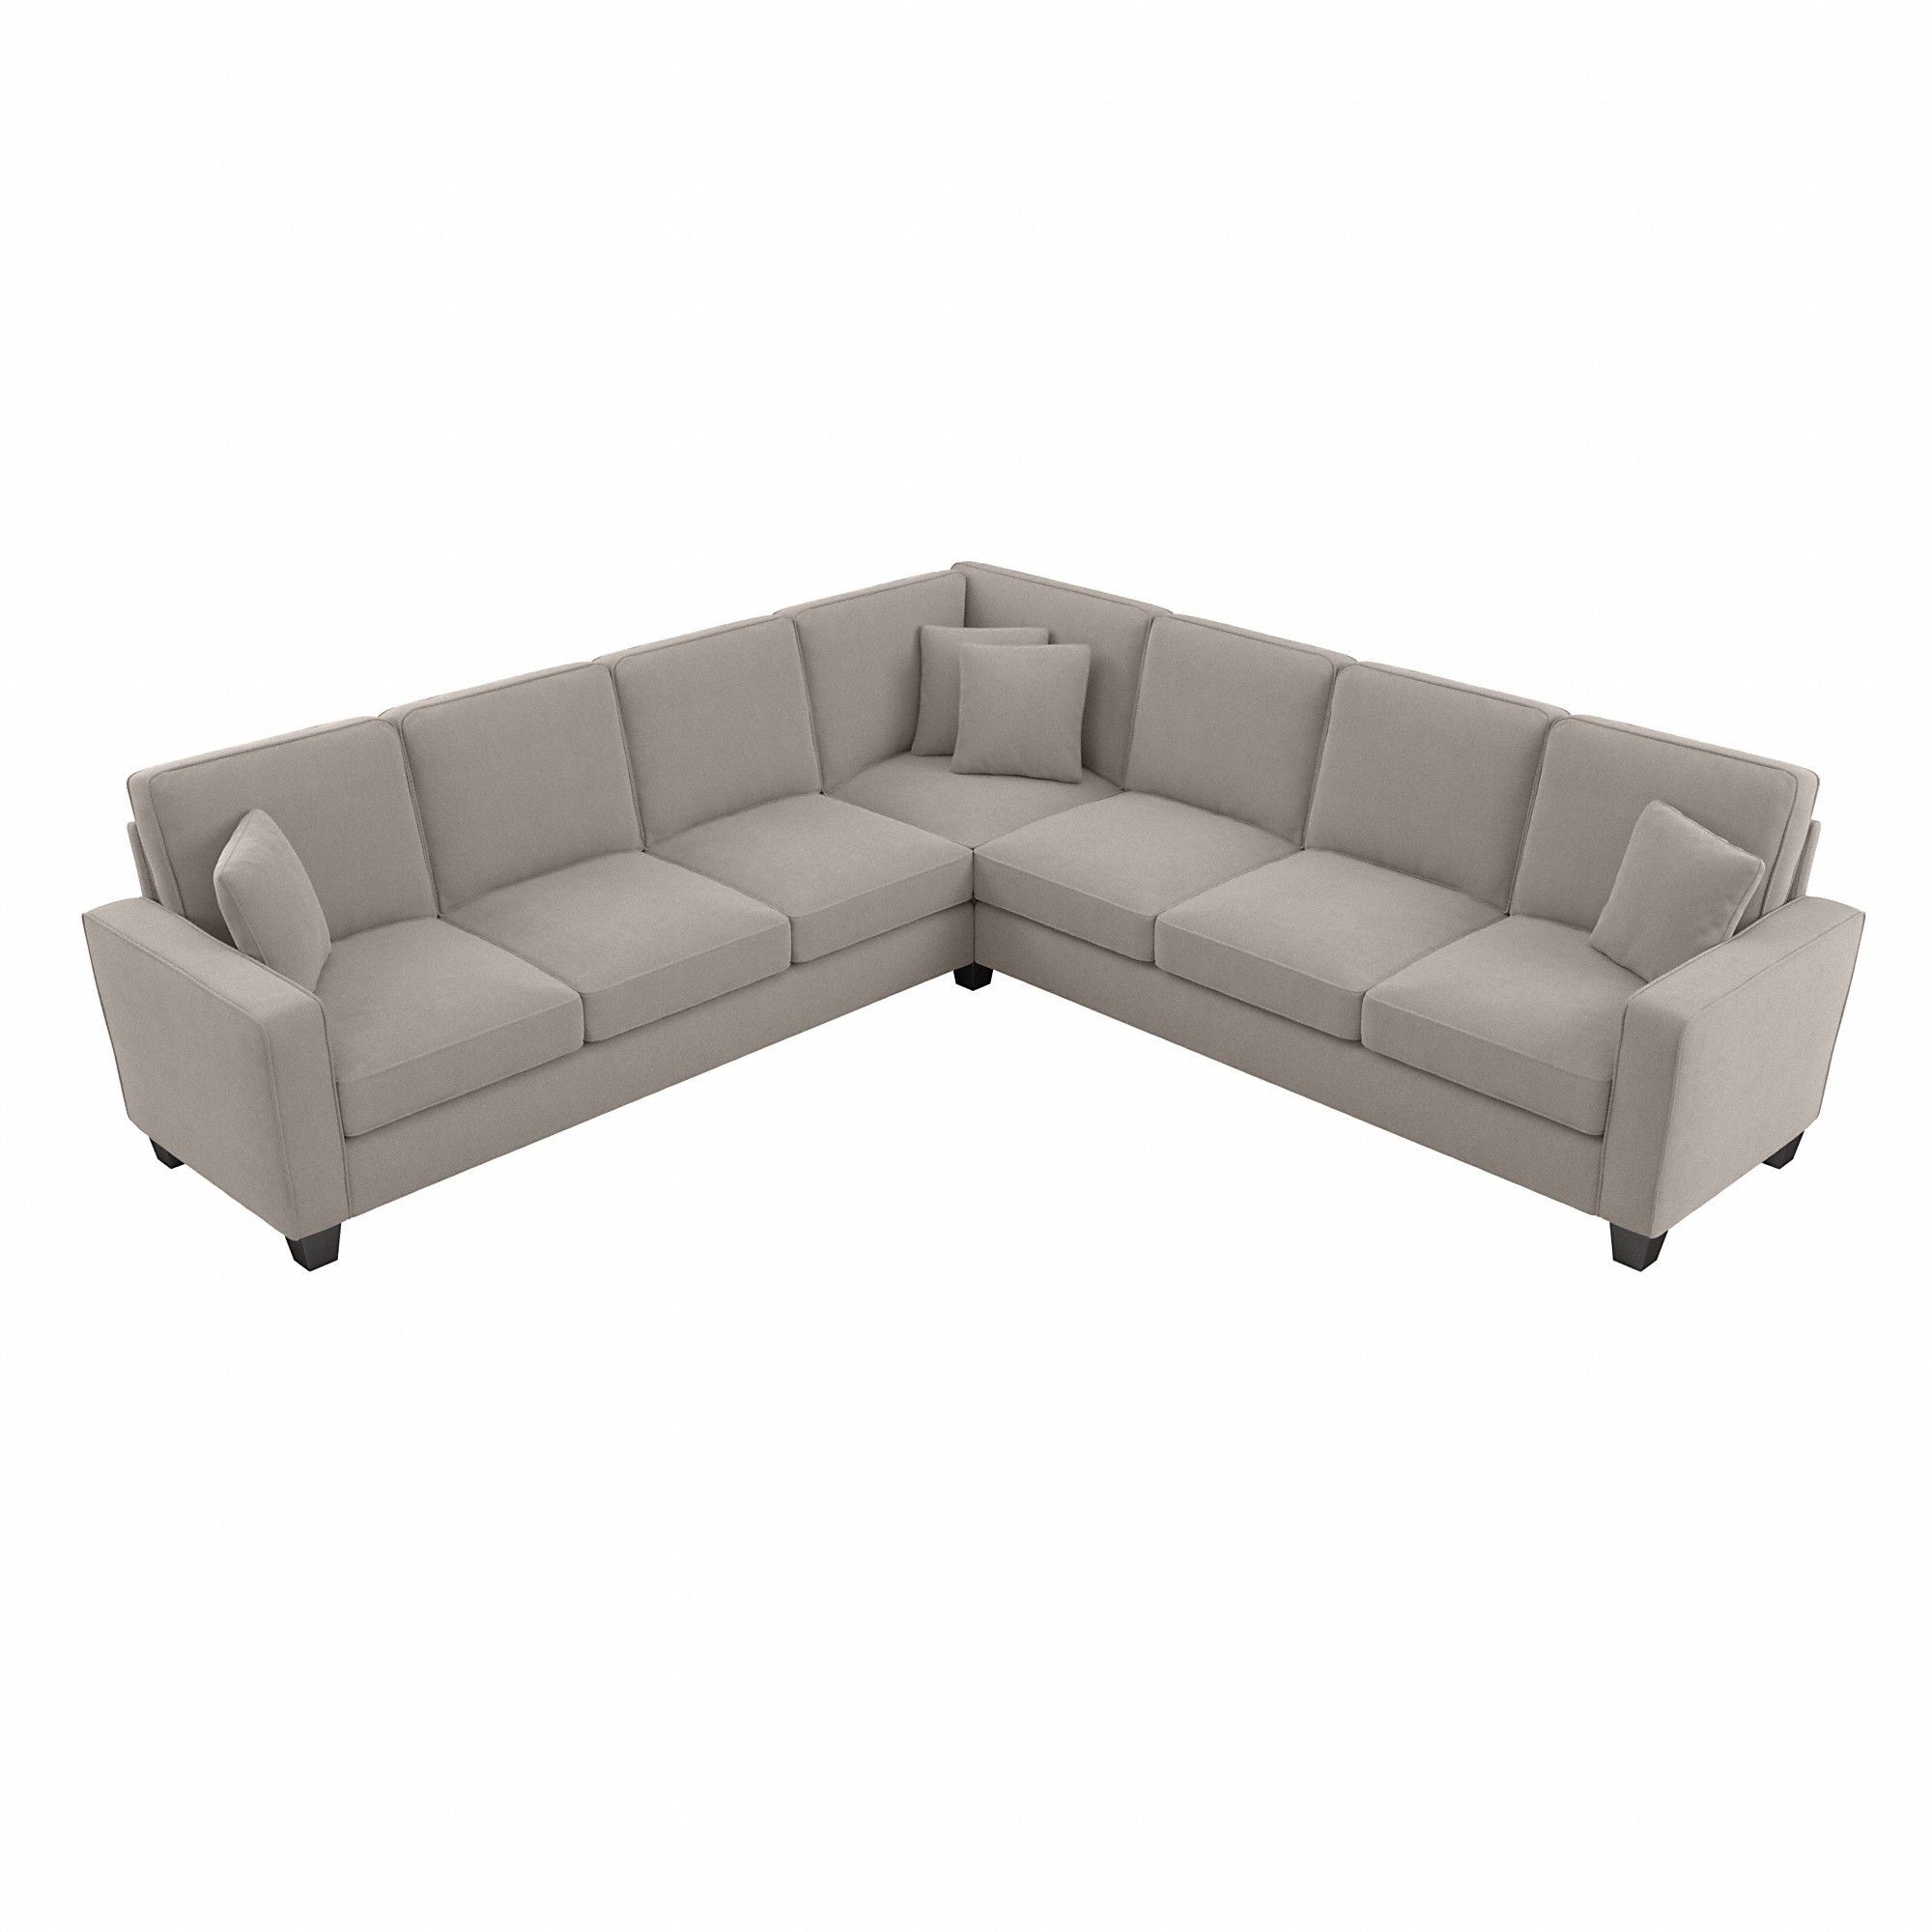 Furniture Stockton 110w L Shaped Sectional Couch In Beige Herringbone Intended For Well Known Beige L Shaped Sectional Sofas (Photo 7 of 15)